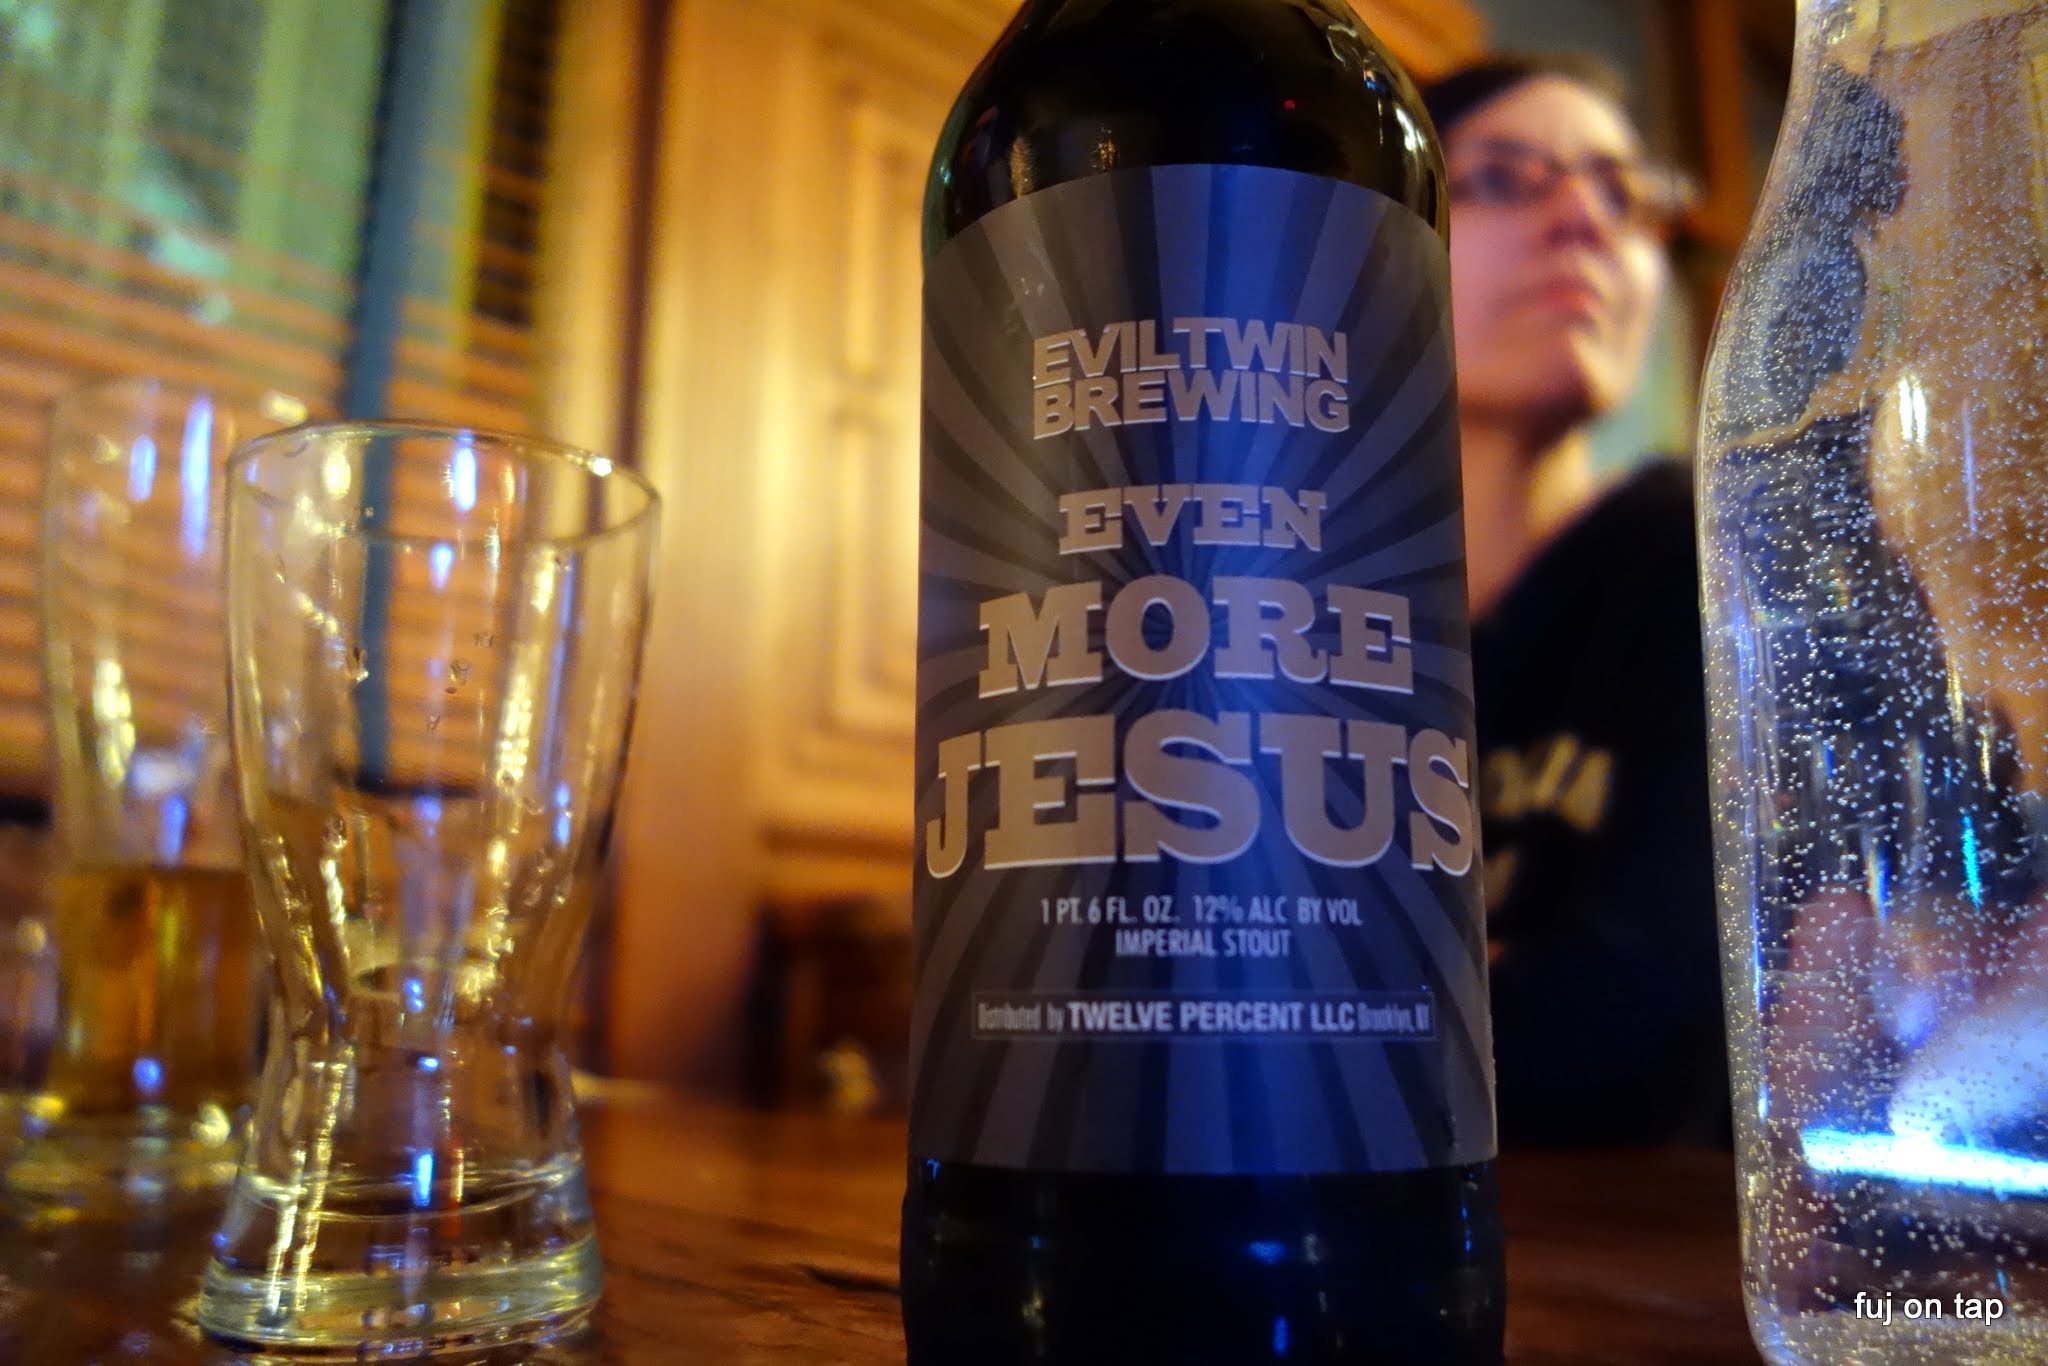 Even More Jesus by Evil Twin Brewing